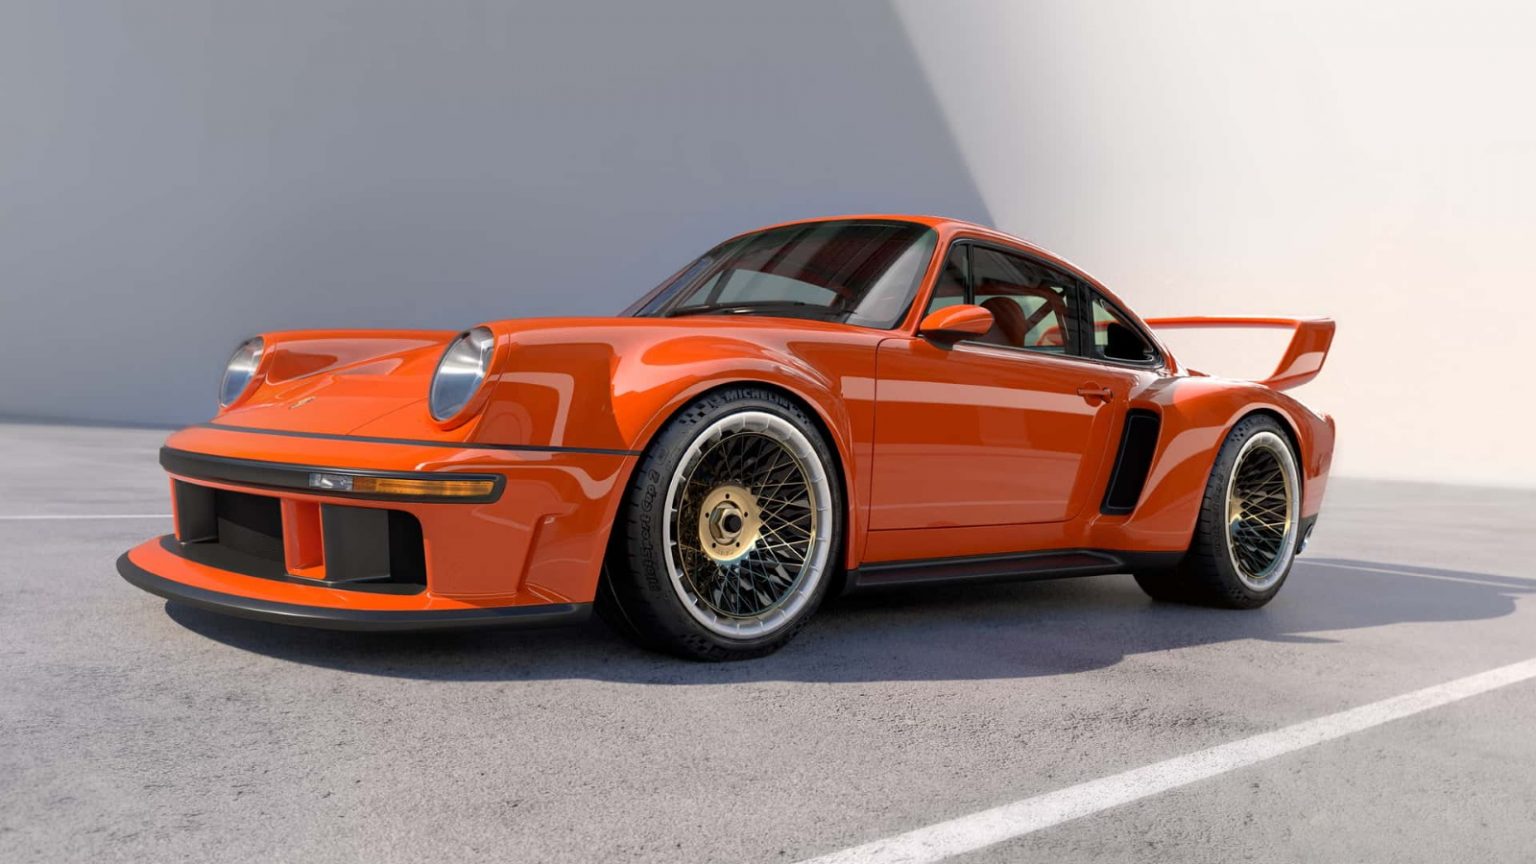 bao singer type porsche dls turbo a masterpiece of craftsmanship and innovation 6556782fd816a Singer Type 964 Porsche 911 Dls Turbo: A Masterpiece Of Craftsmanship And Innovation